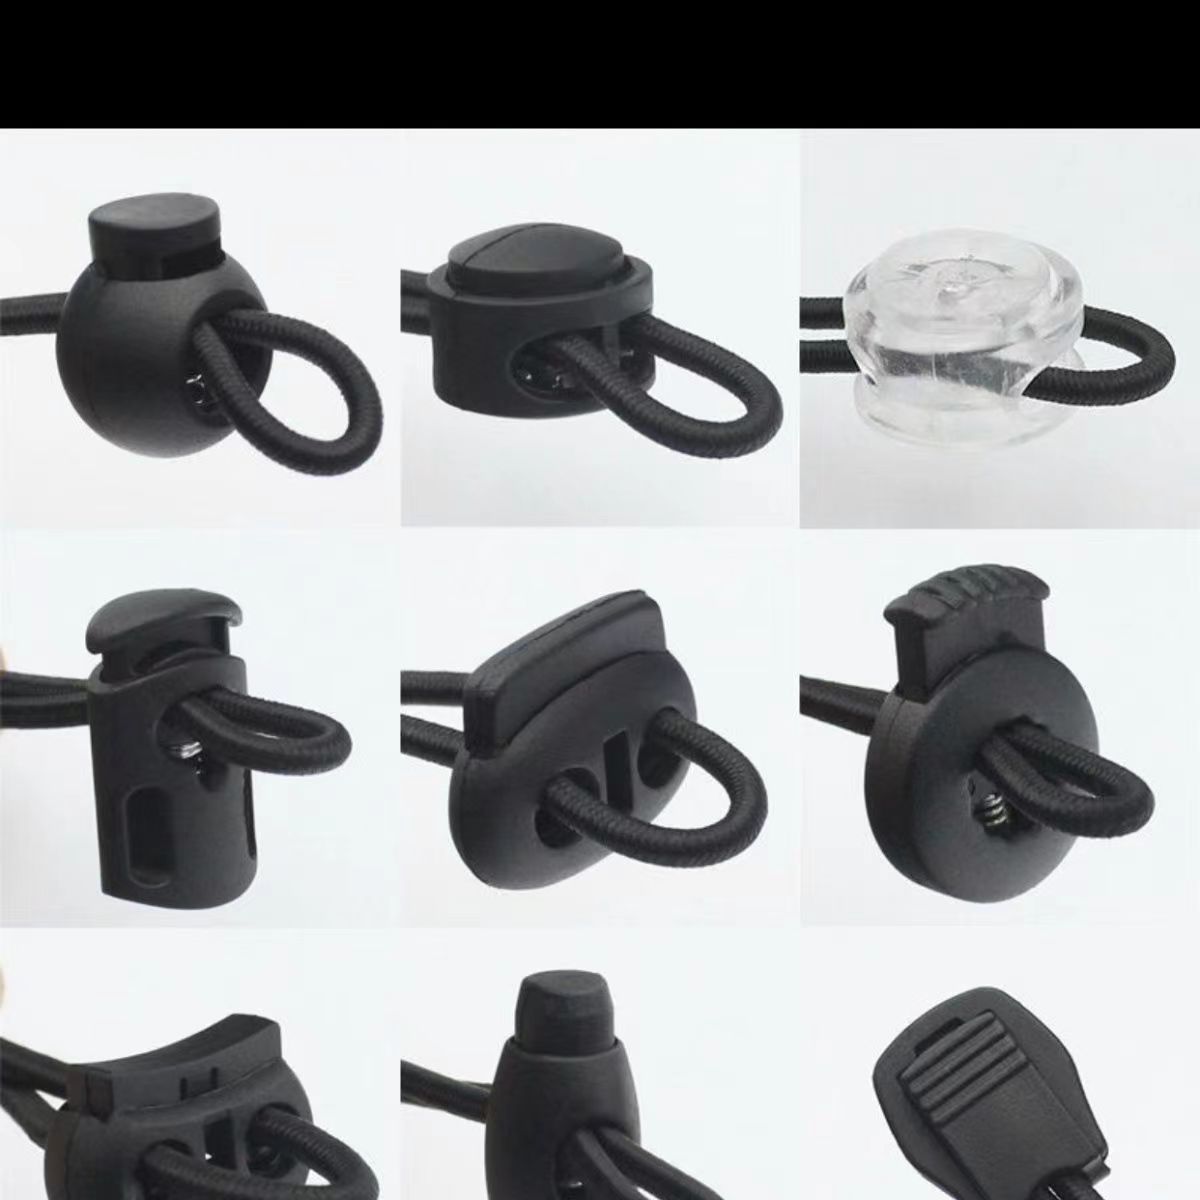 Advantages of Plastic Spring Buckles for Shoelaces